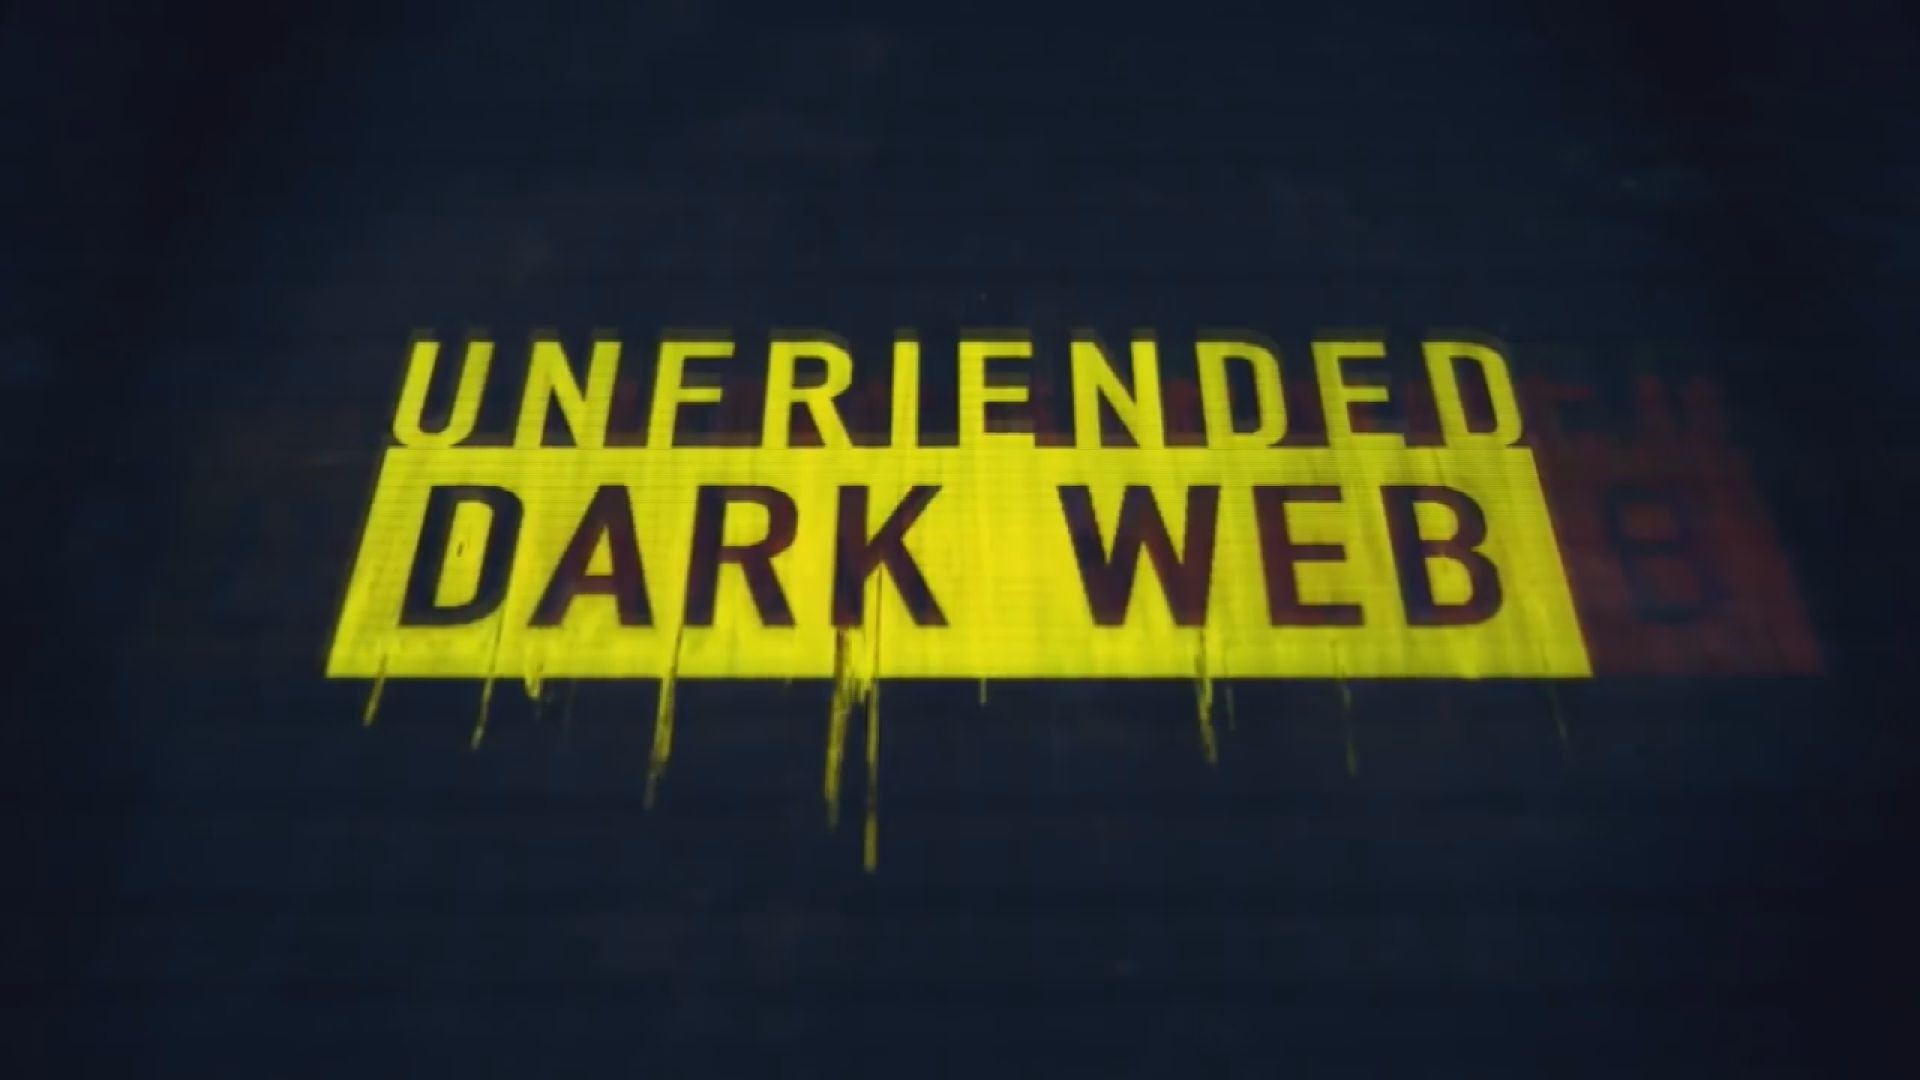 Is Unfriended Based On A True Story? The Definitive Answer - Is True Story